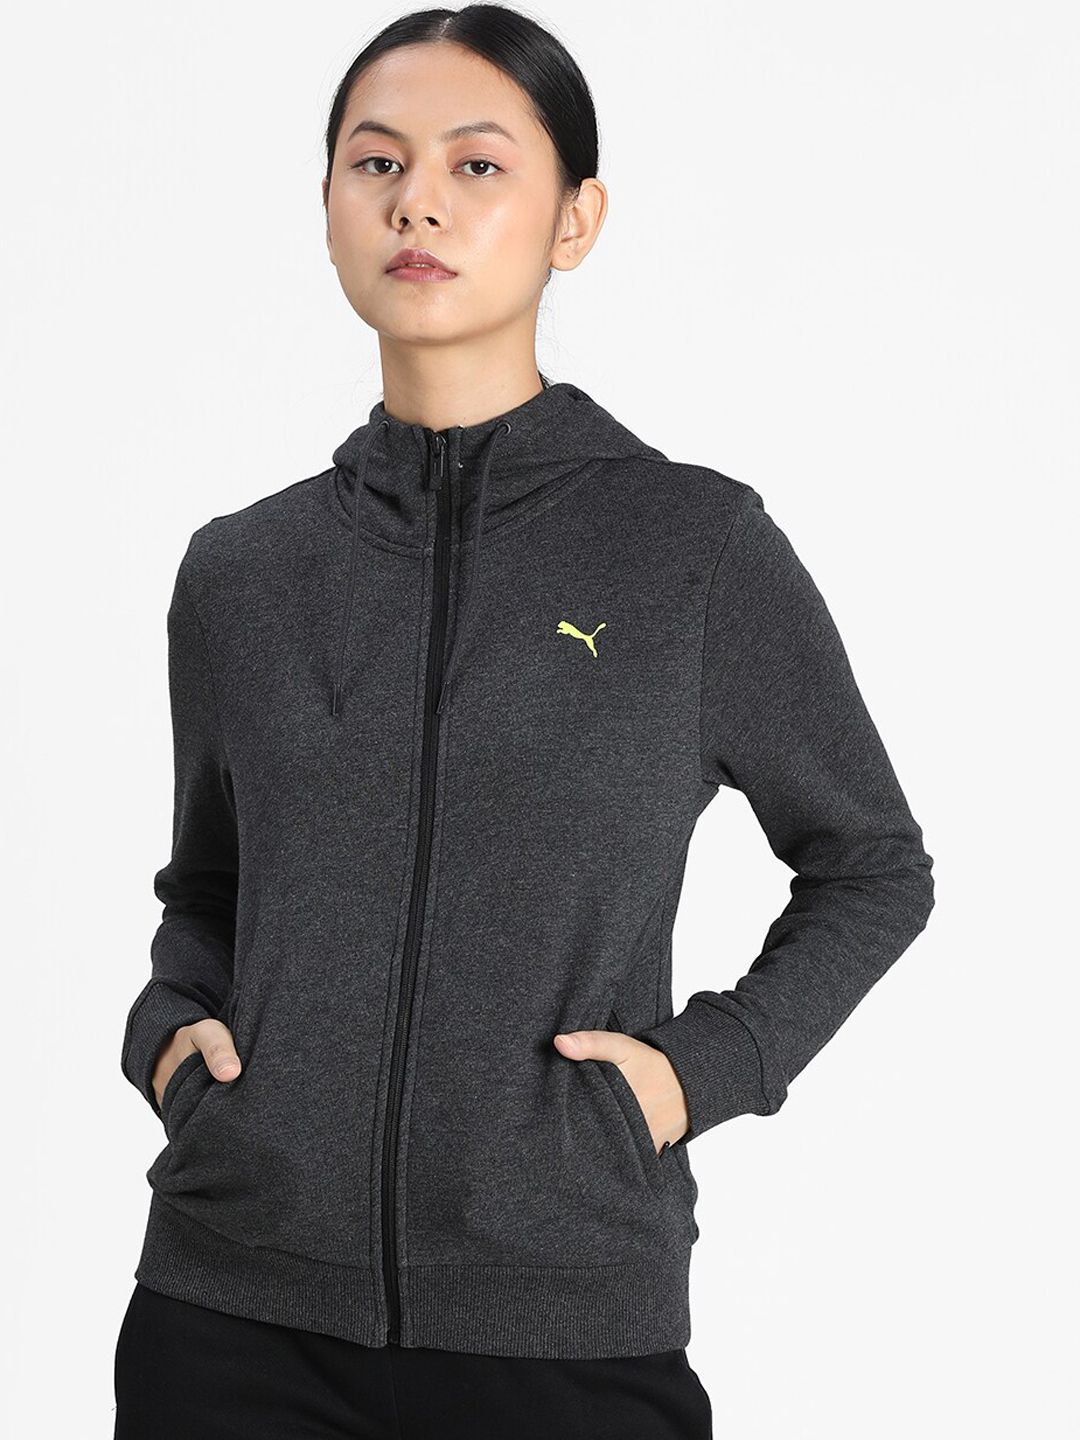 Puma Women Charcoal Grey Printed Sporty Jacket Price in India